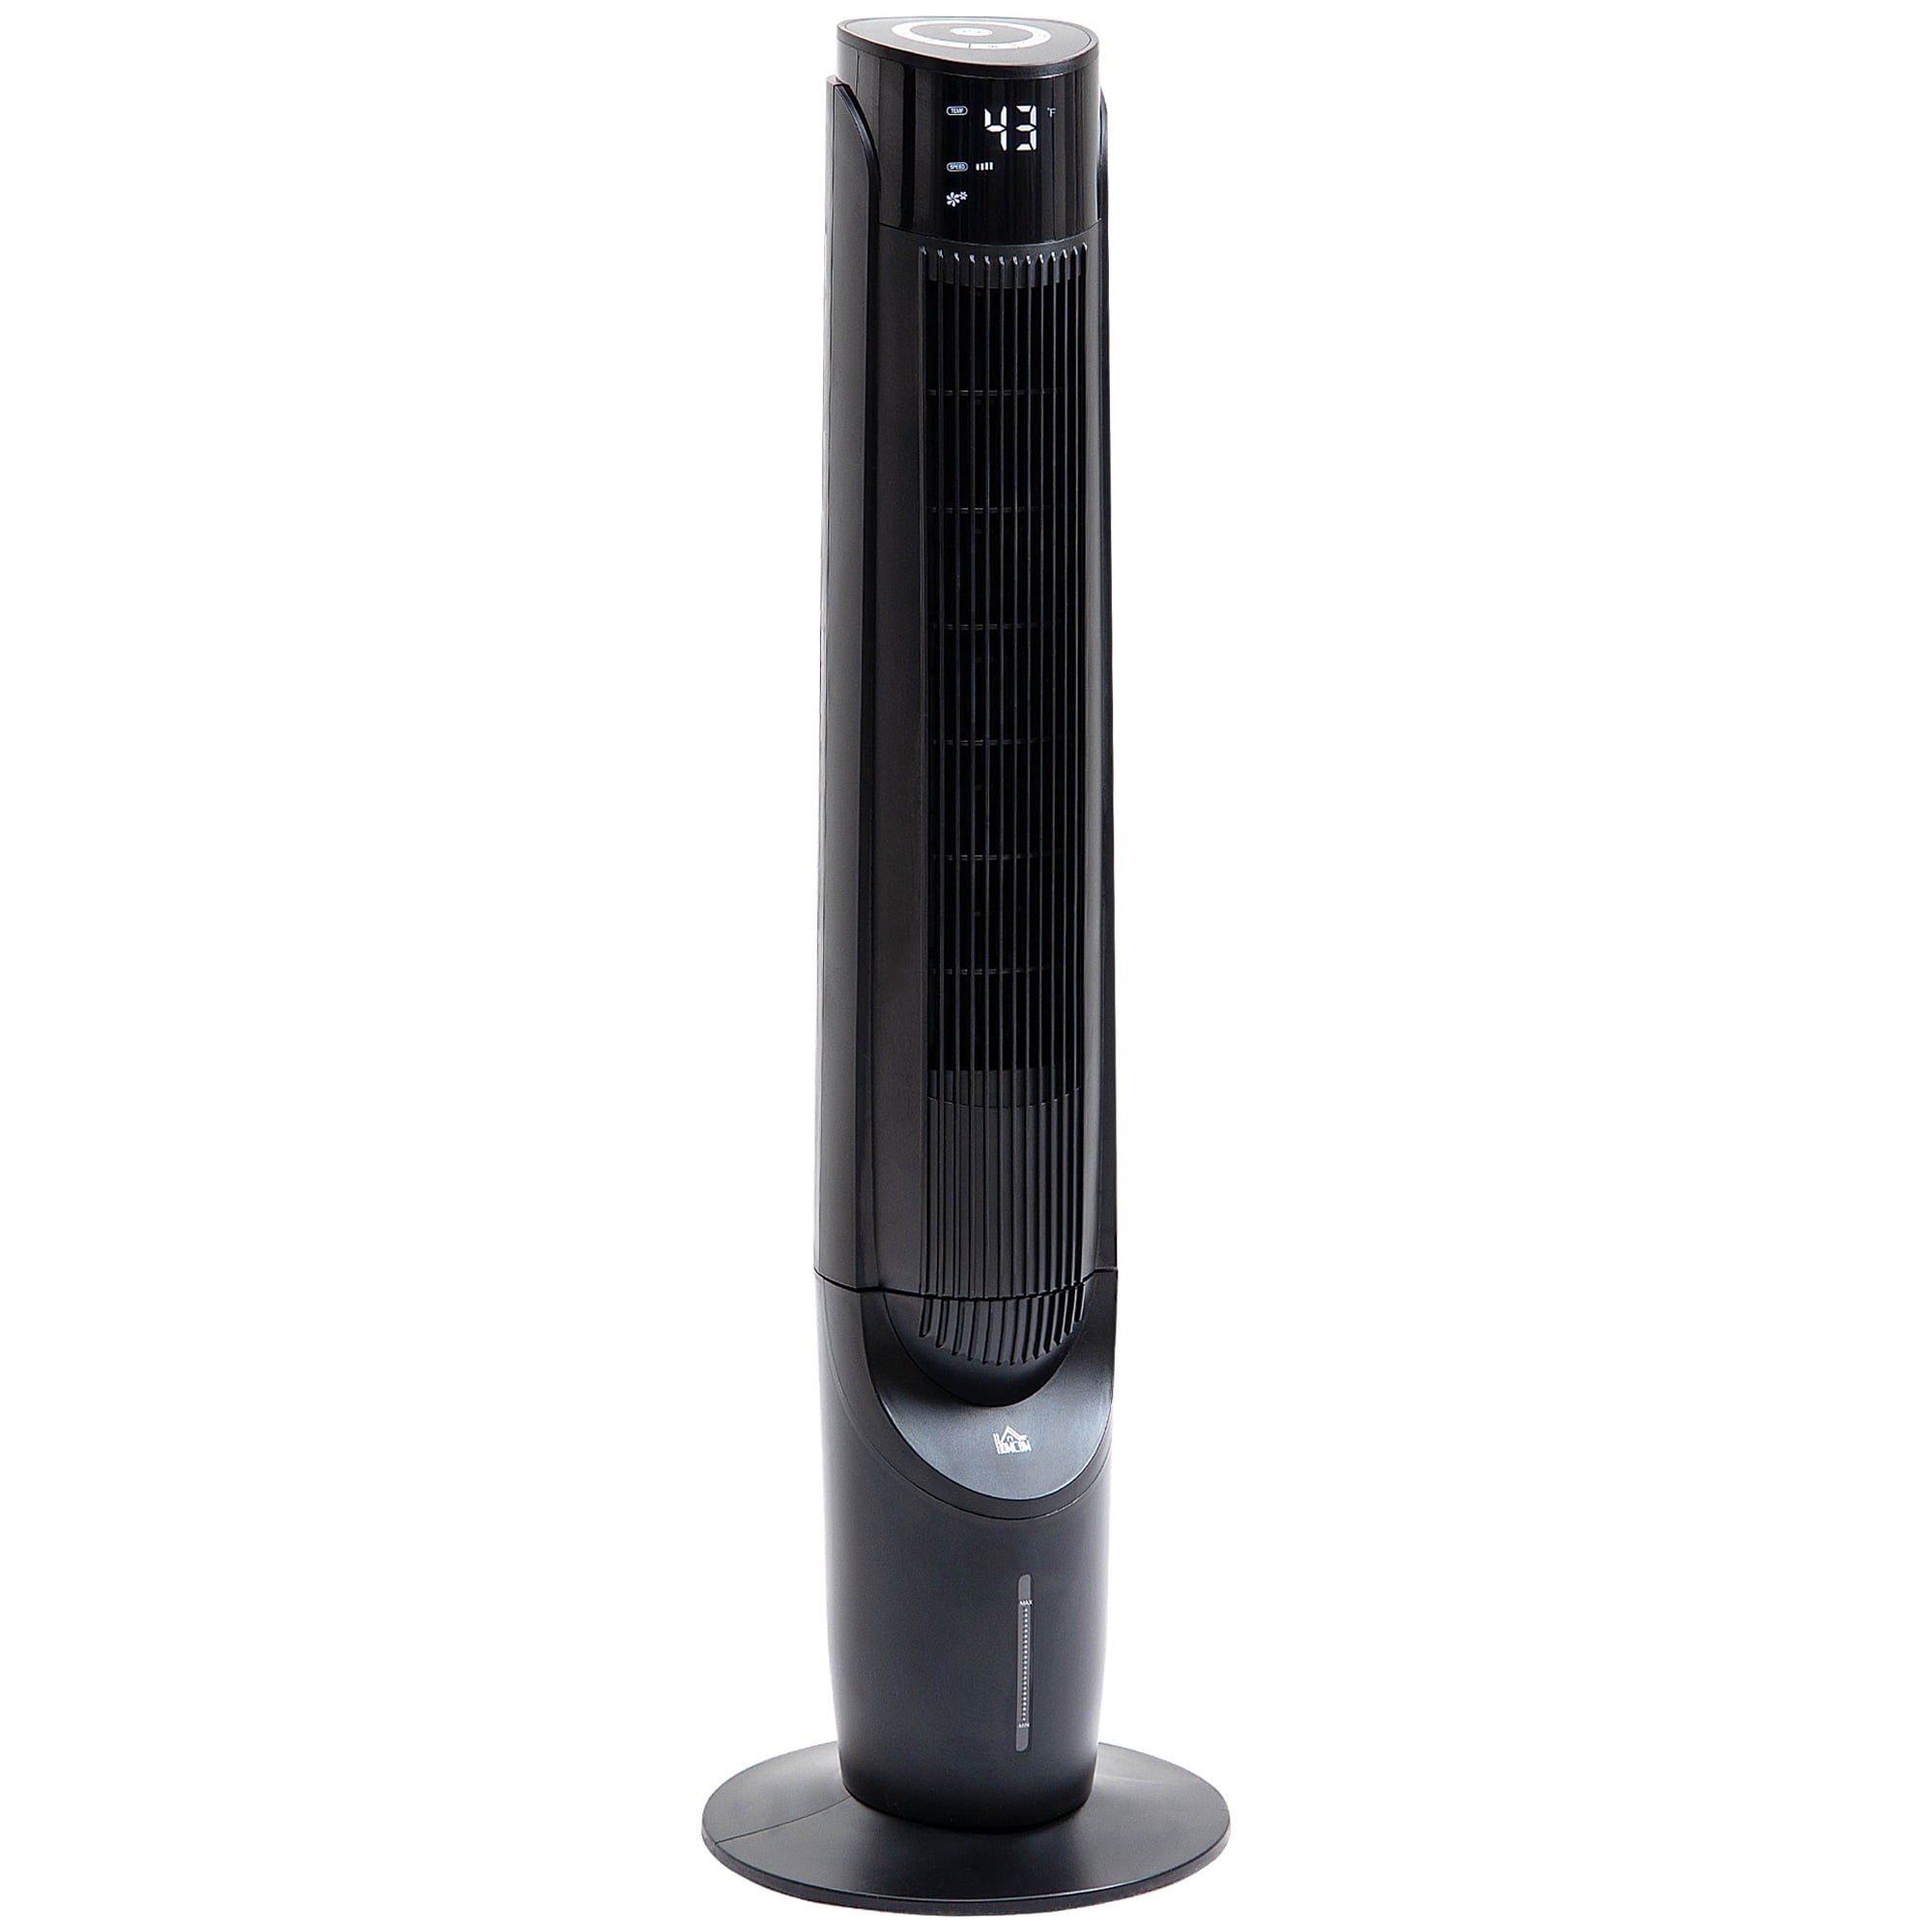 Black HOMCOM Oscillating Tower Fan 30 3 Speed Mode Ultra Slim Indoor Air Refresher Cooling Machine Noise Reduction 